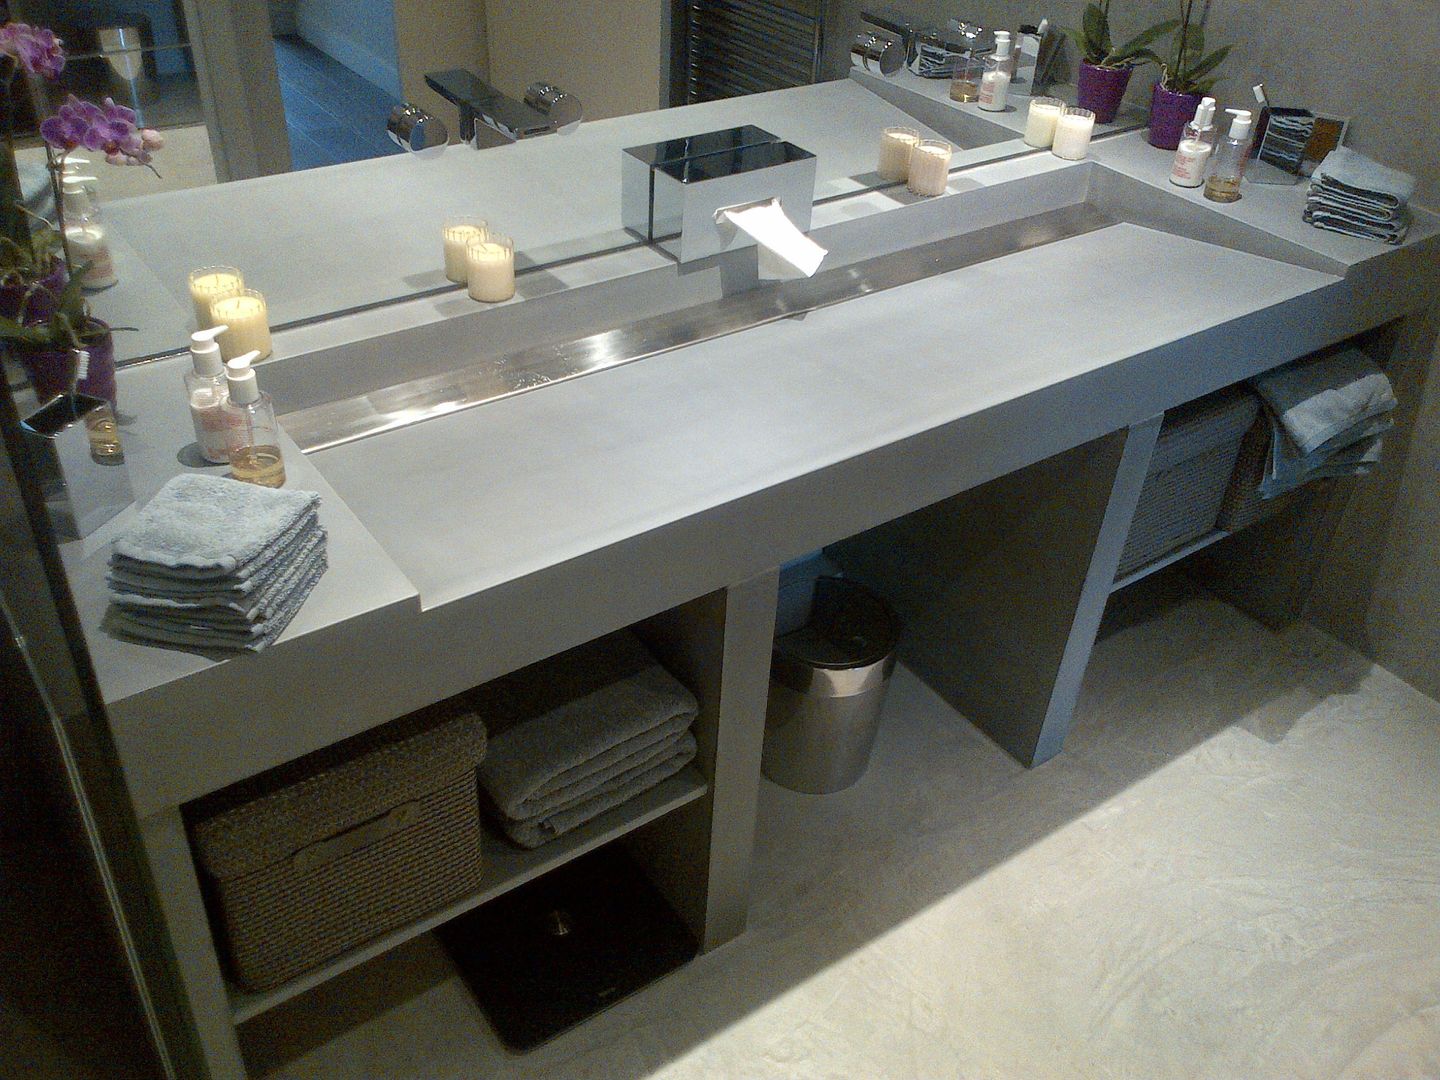 Concrete sinks & Brushed stainless steel Concrete LCDA Modern bathroom concrete sink,concrete bathroom,bespoke sink,bespoke bathroom